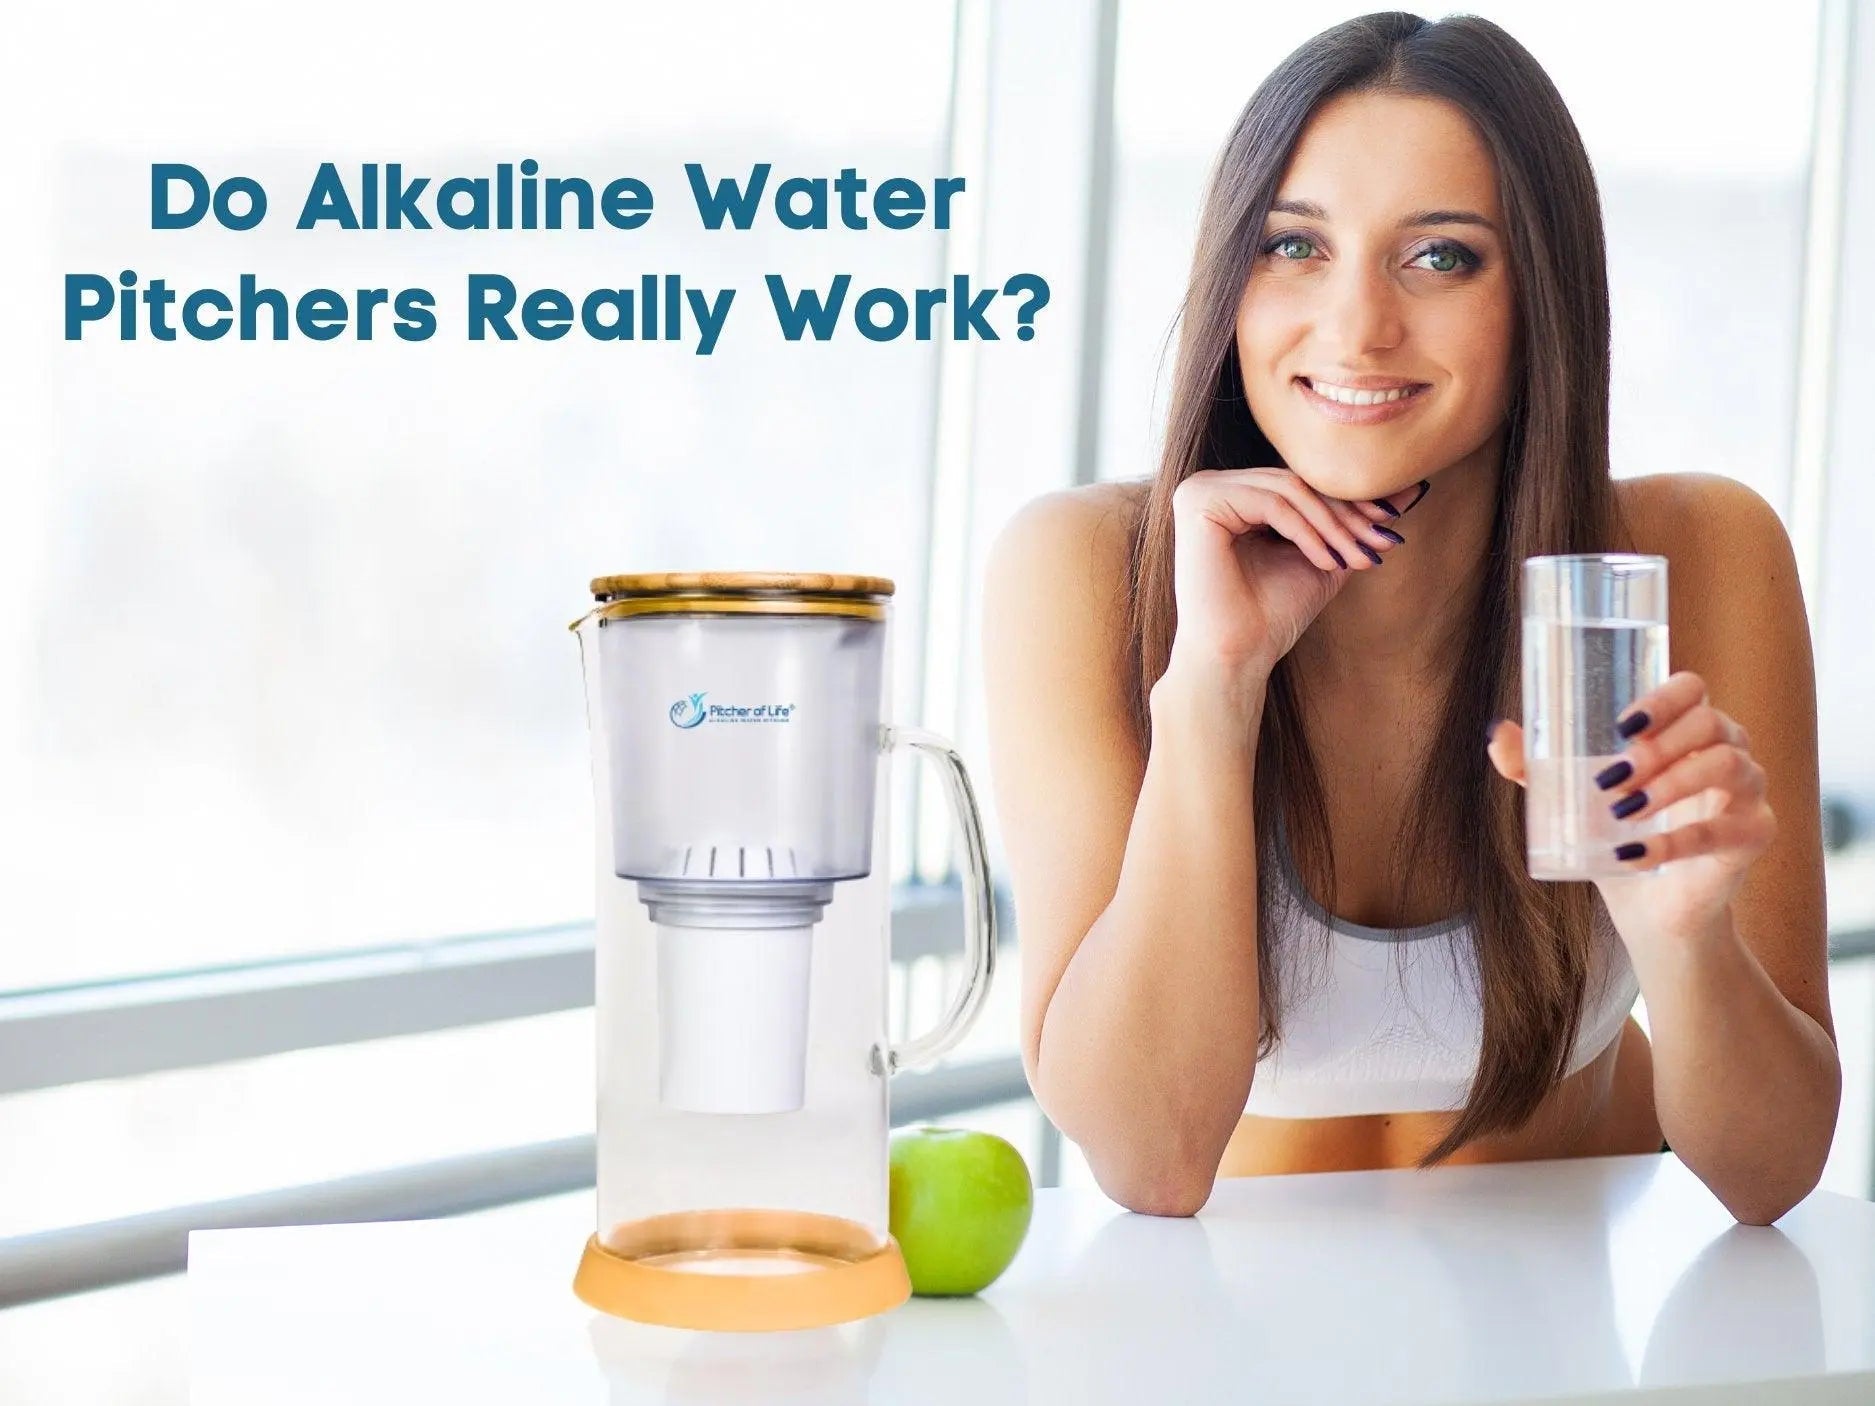 Do Alkaline Water Pitchers Really Work? - Pitcher of Life